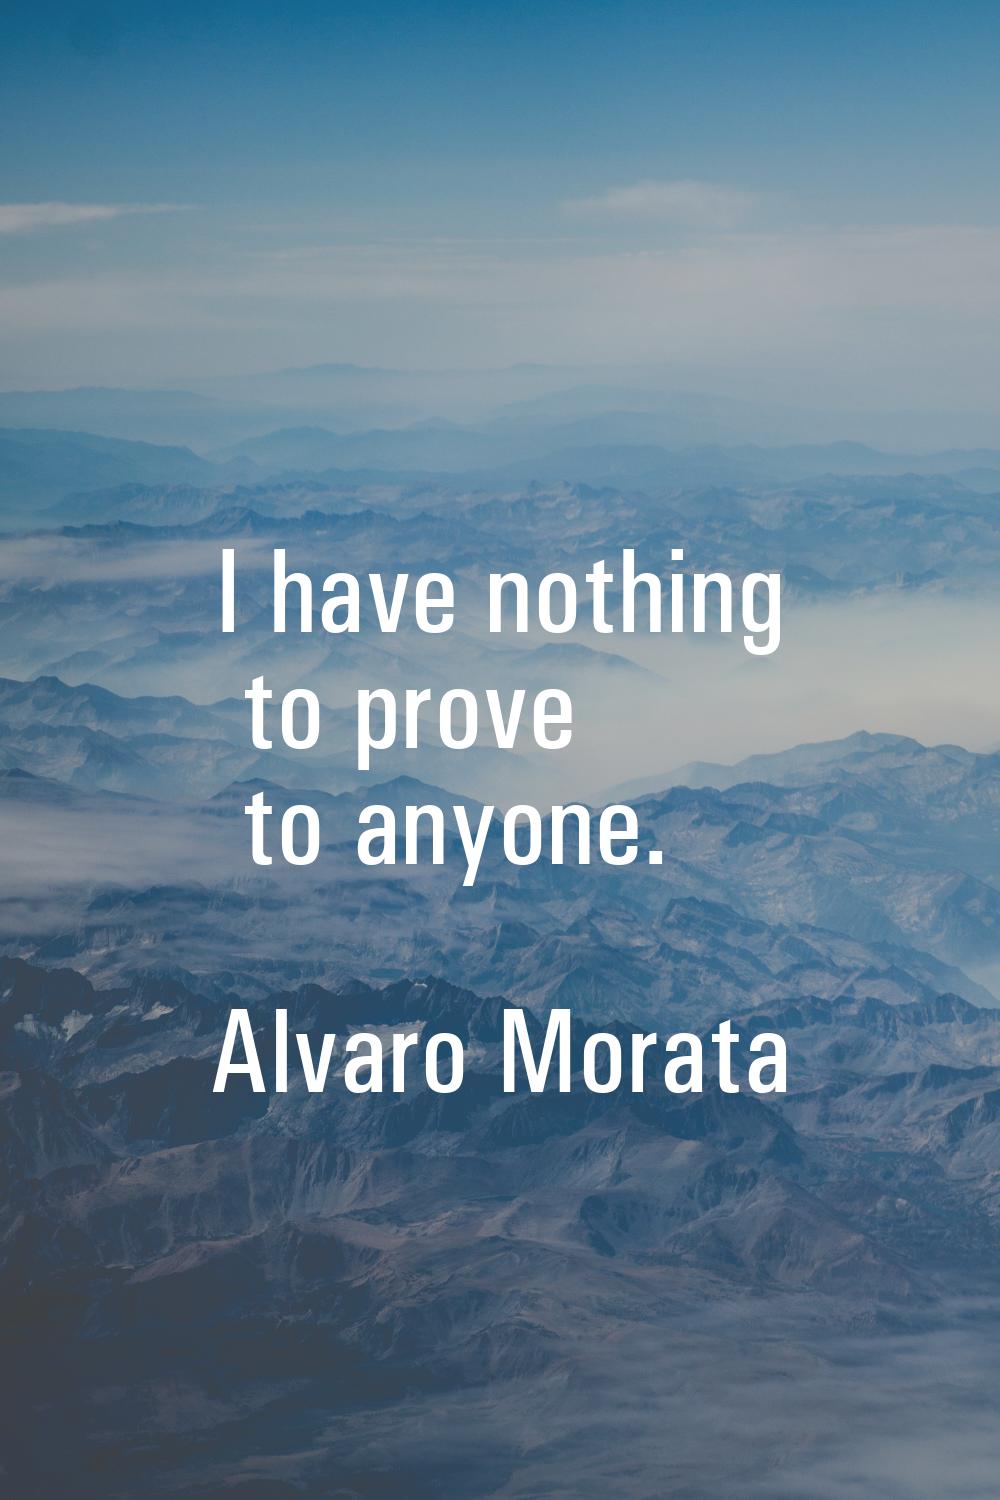 I have nothing to prove to anyone.